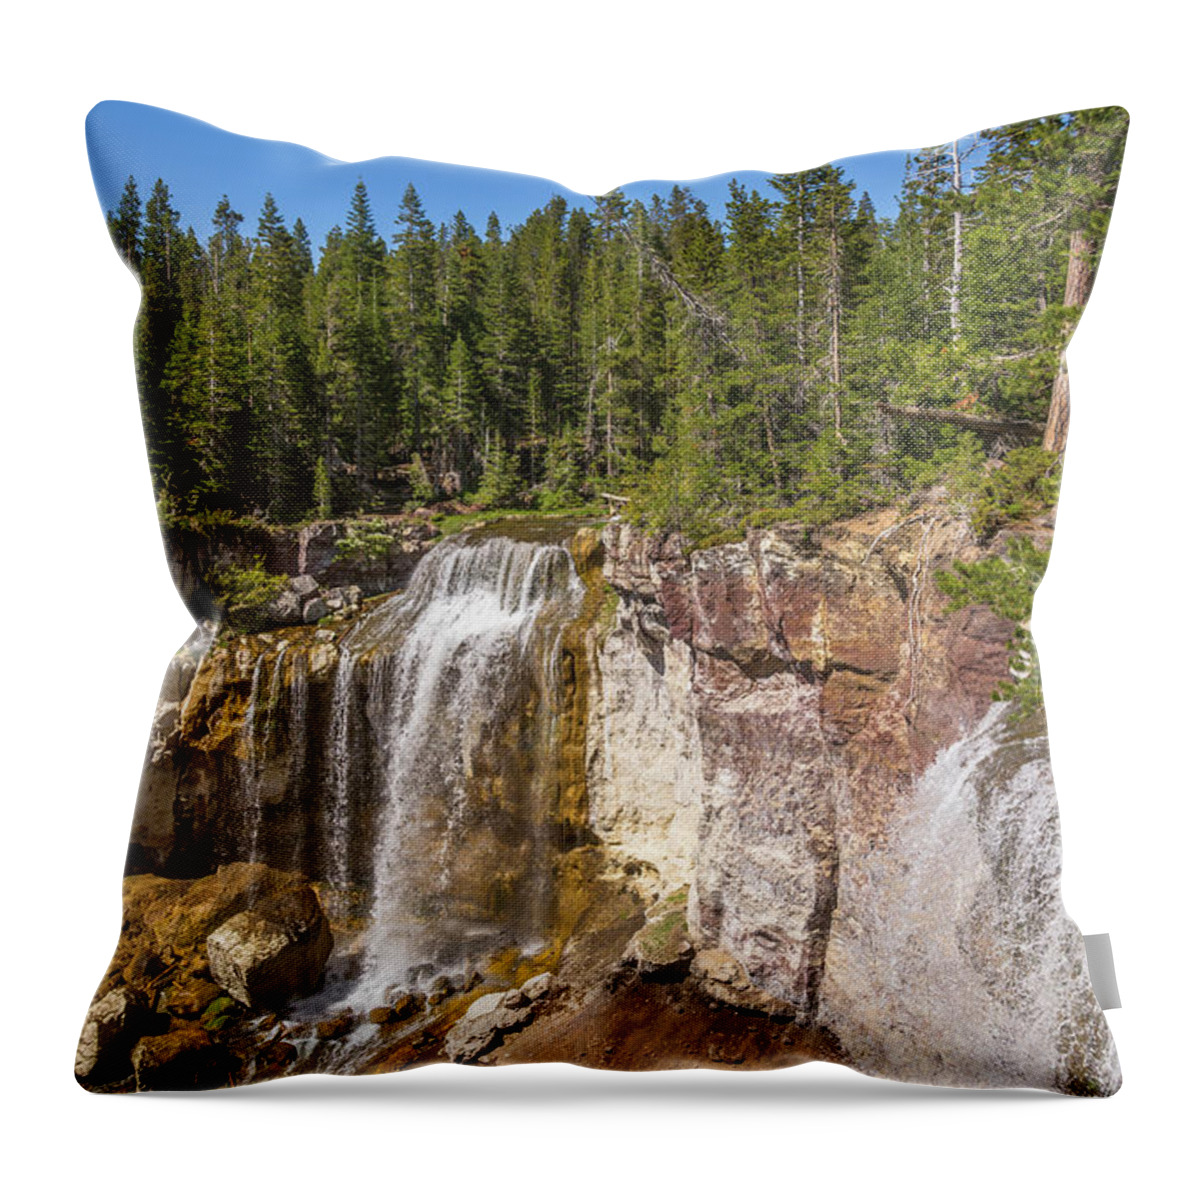 America Throw Pillow featuring the photograph Paulina Creek Falls From The Top by Marv Vandehey